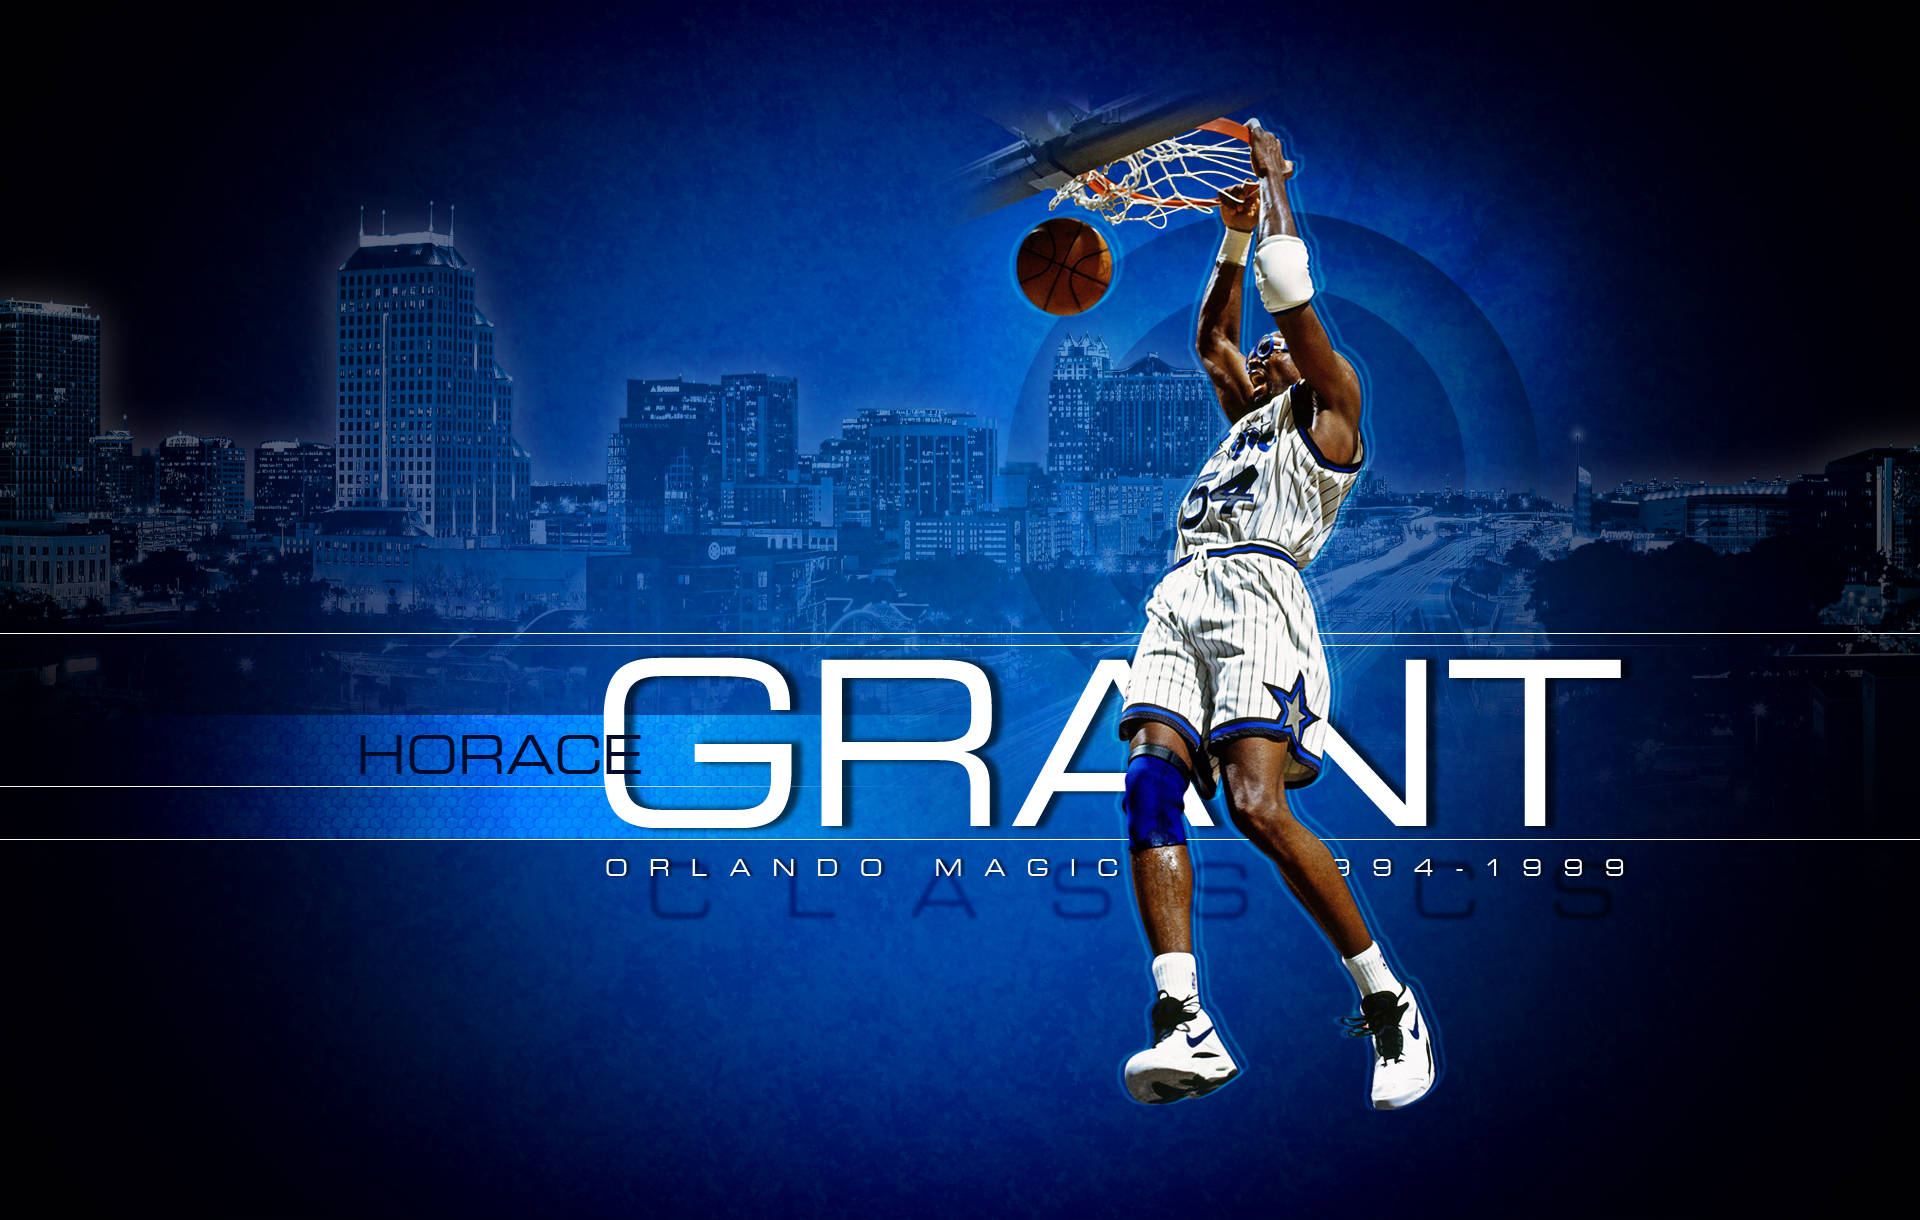 Orland Magic Horace Grant Cover Background